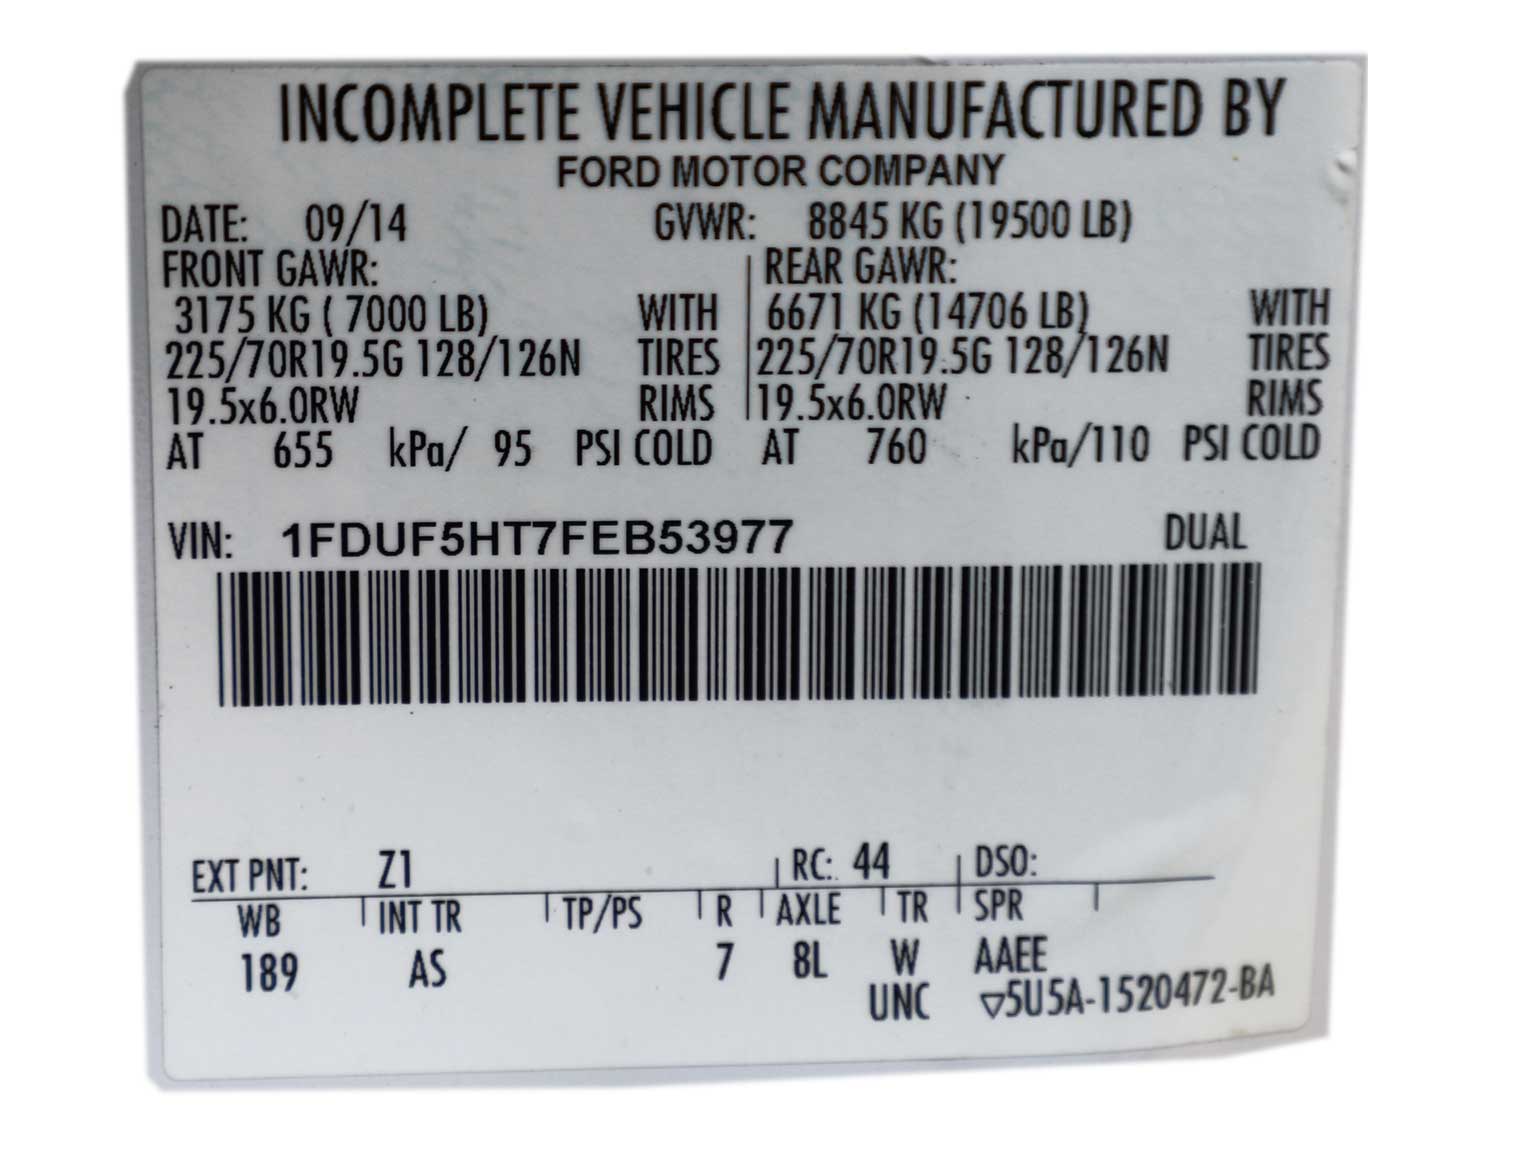 The tag of an incomplete vehicle manufactured by ford motor company